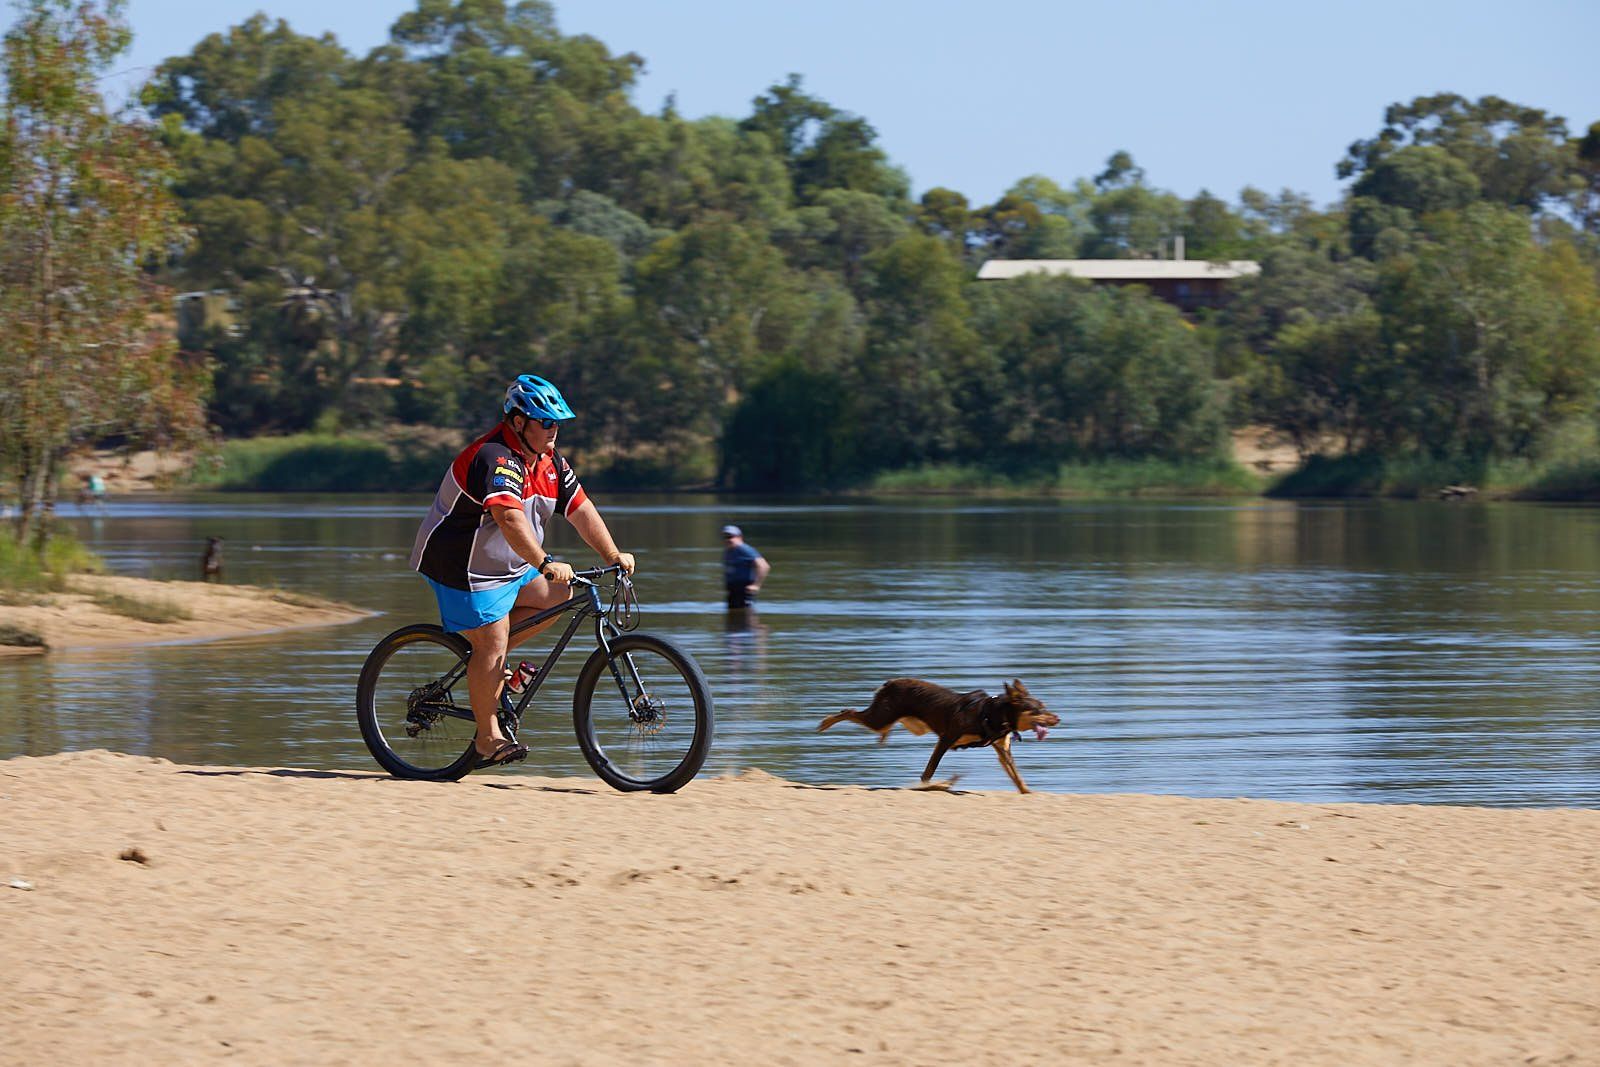 Apex Riverbeach Holiday Park direct beach access, play and exercise